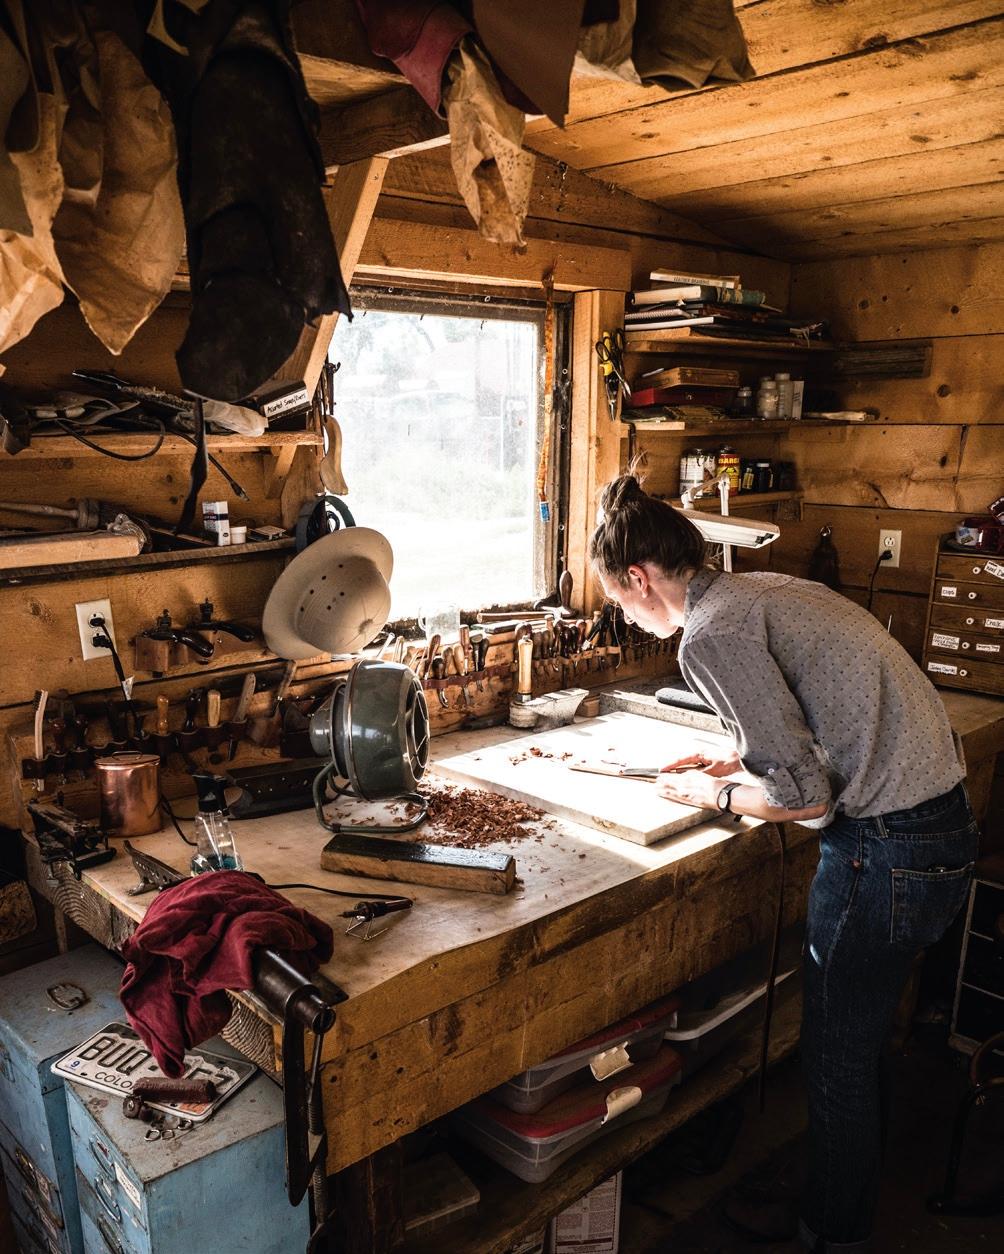 A worker at the leathershop at Chico Basin. (Claudia Landreville)